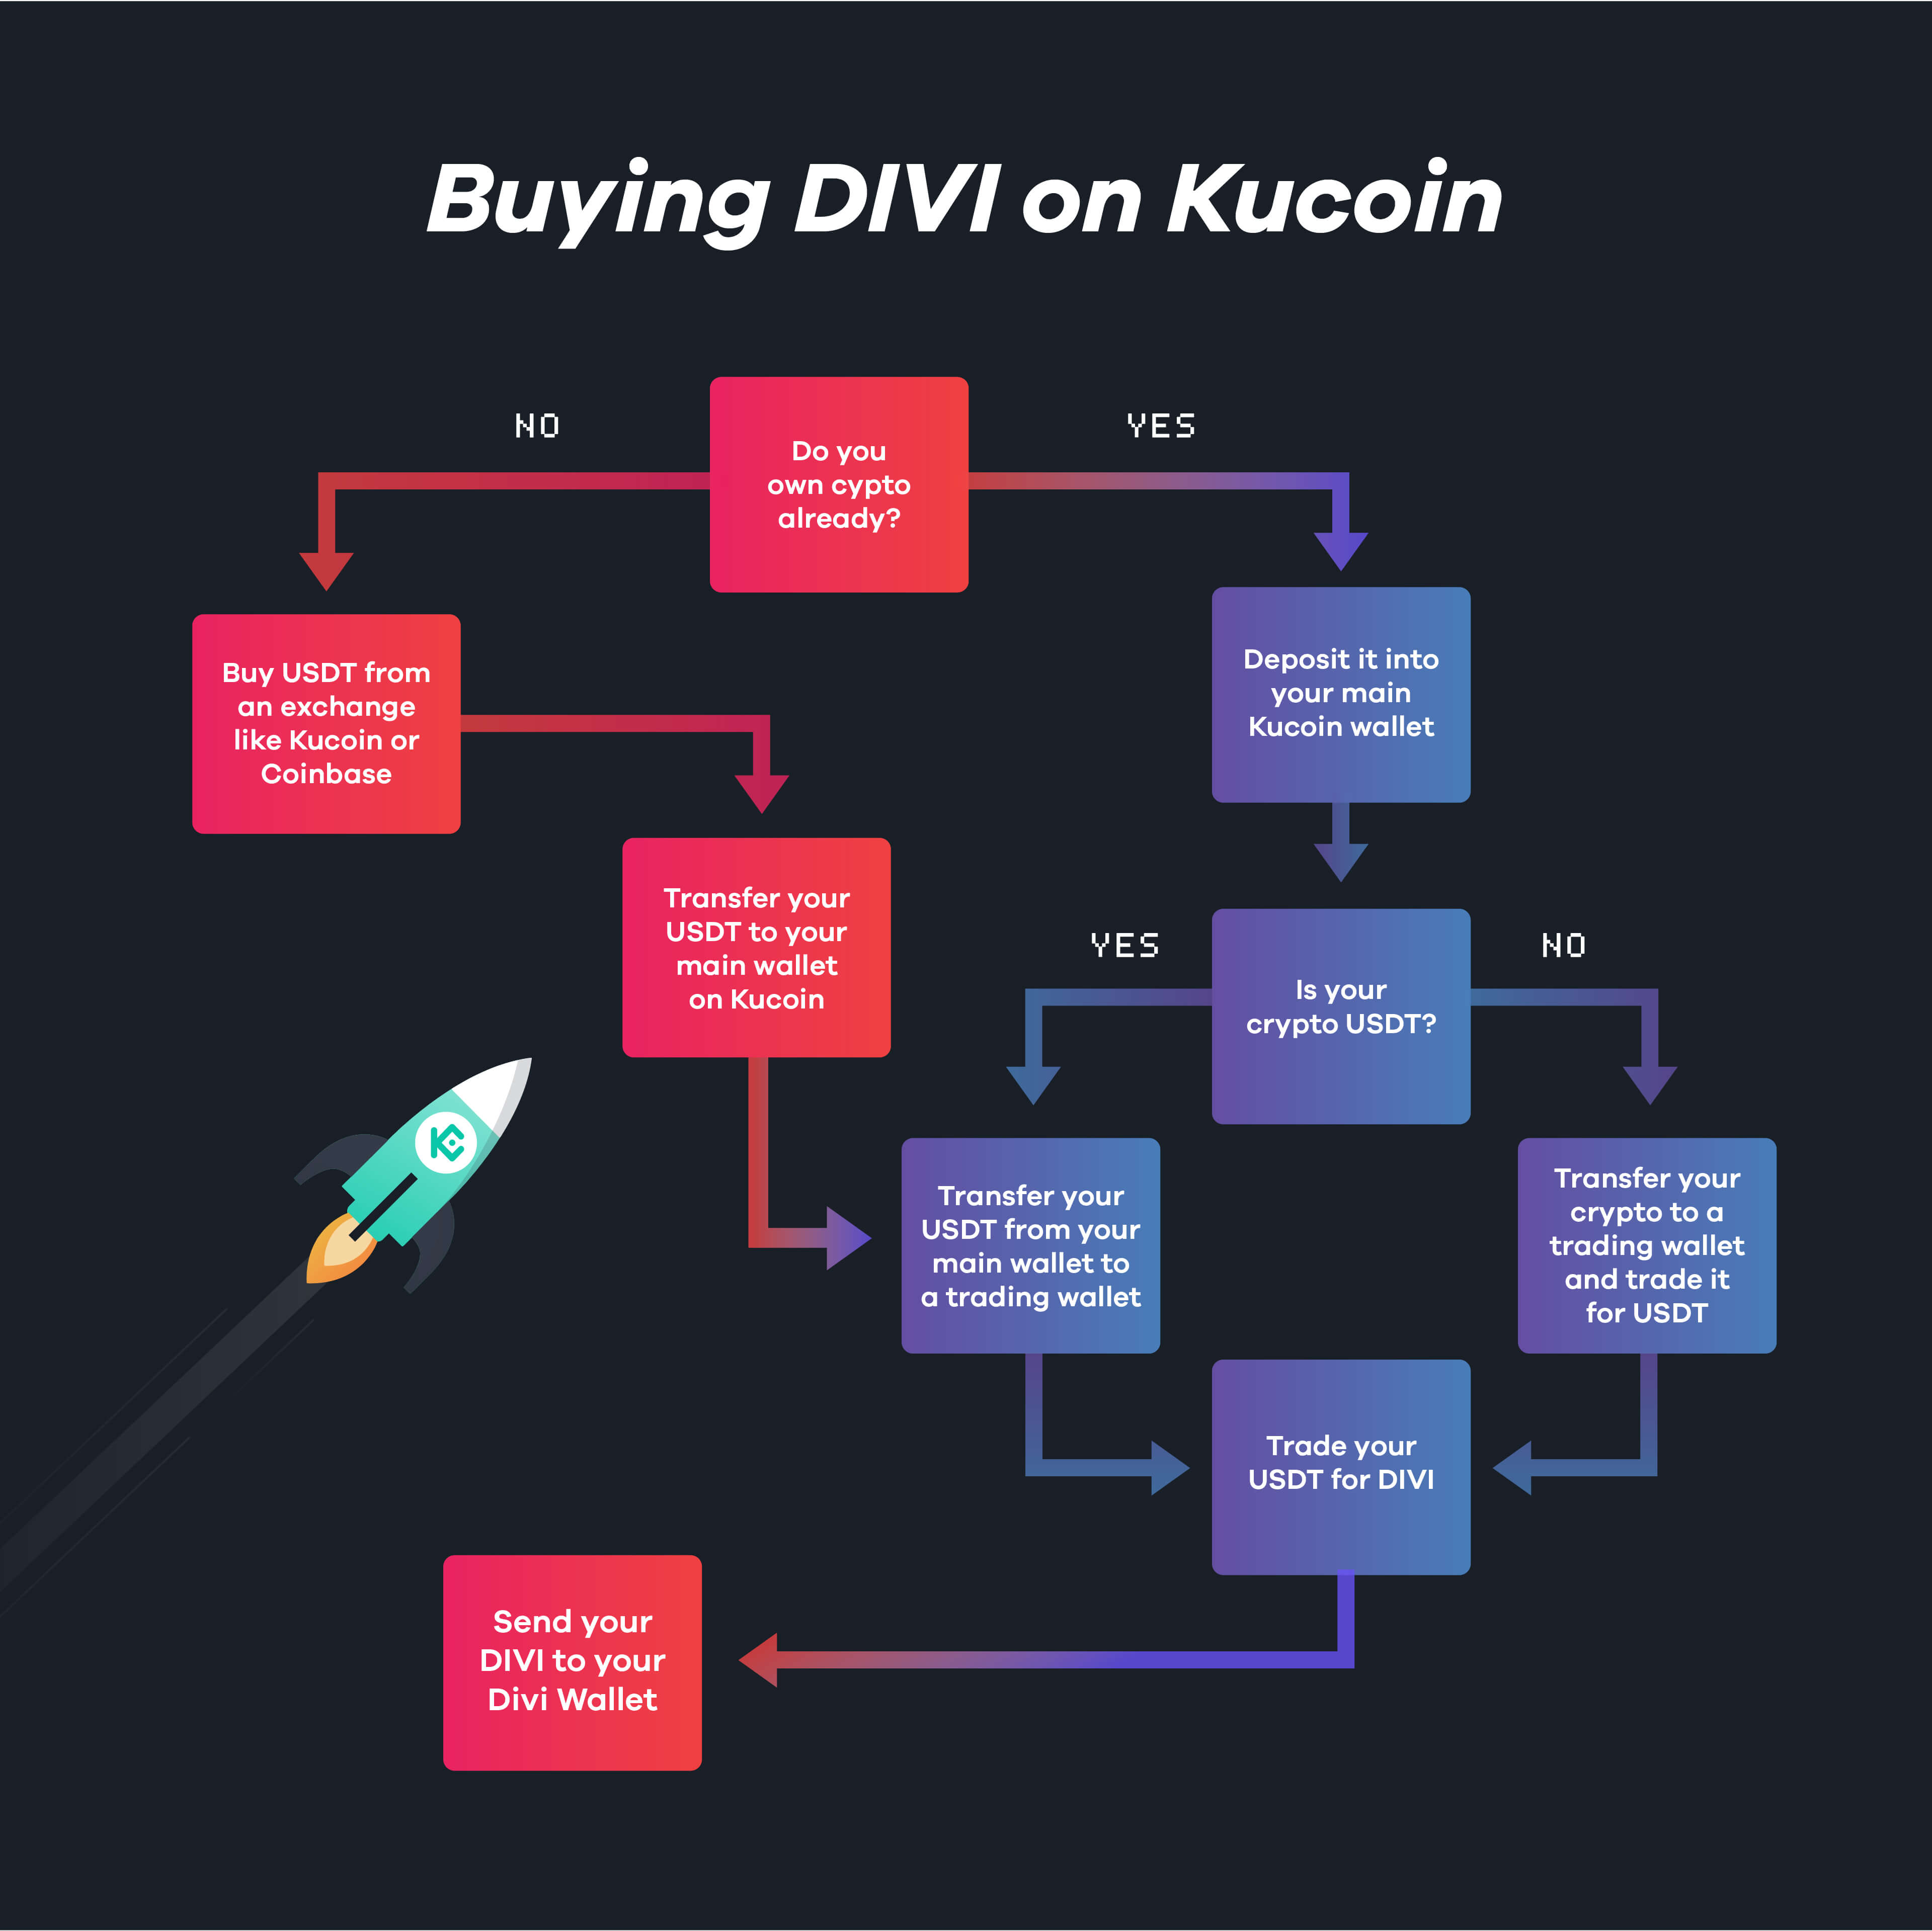 how to buy divi on kucoin